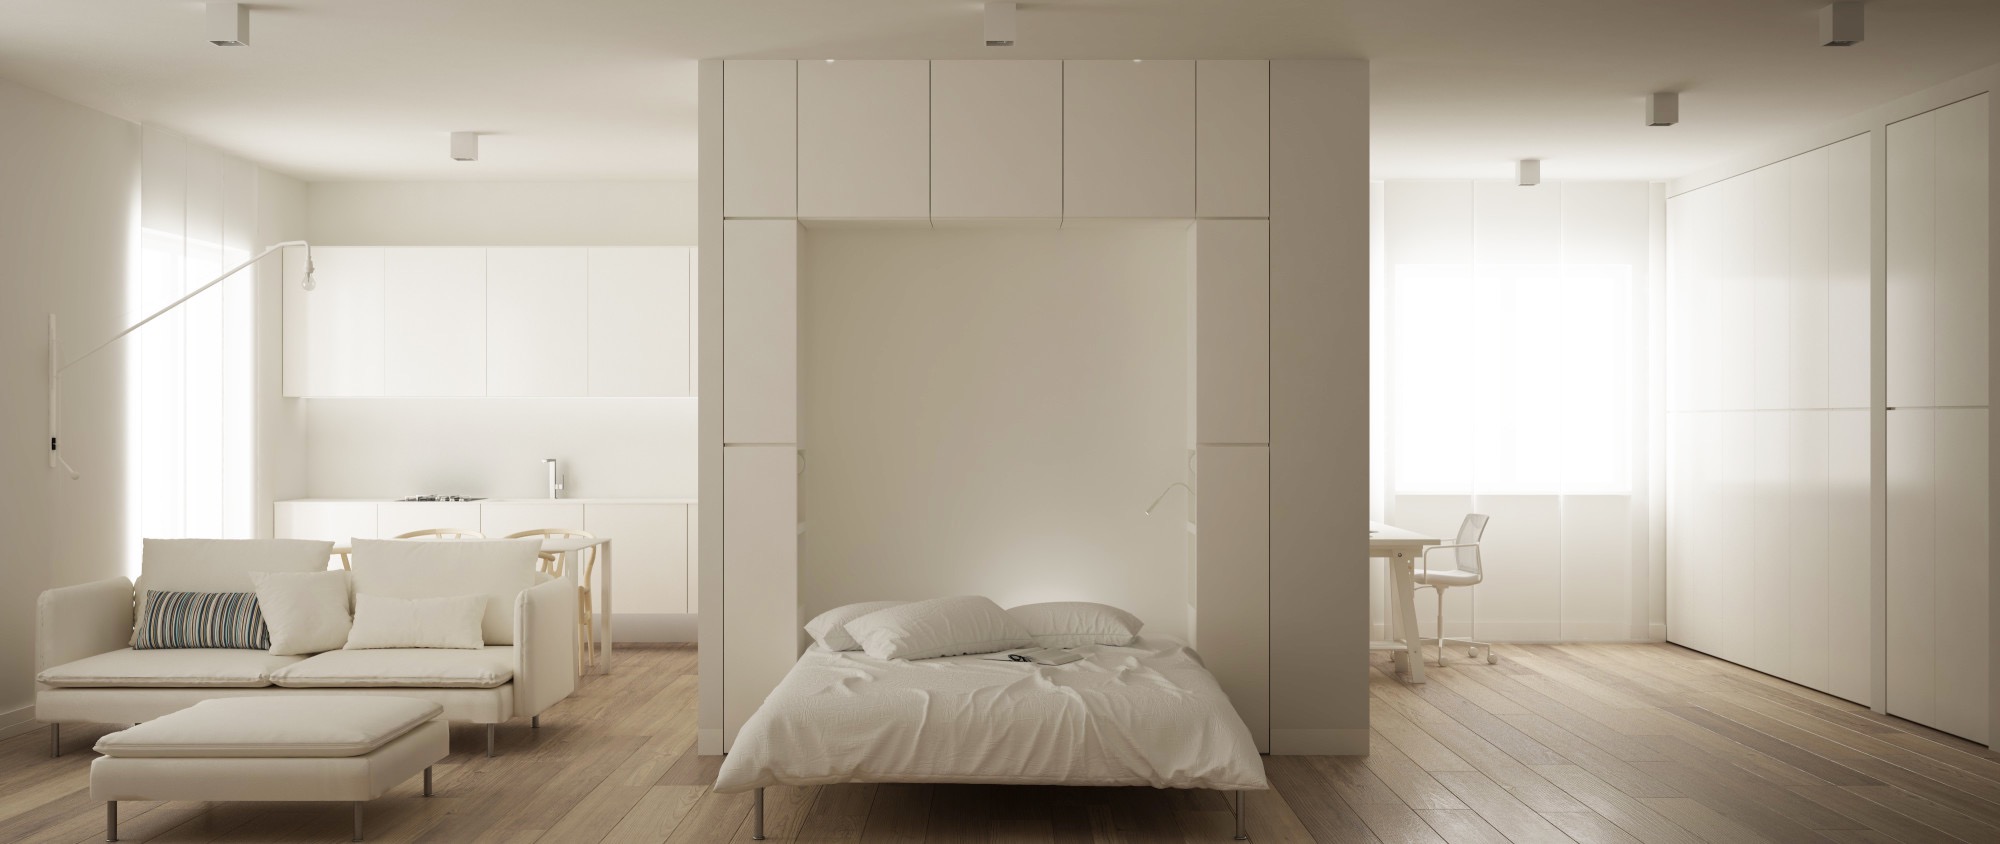 5 Reasons To Have Space Saving Murphy Beds Installed Az Big Media